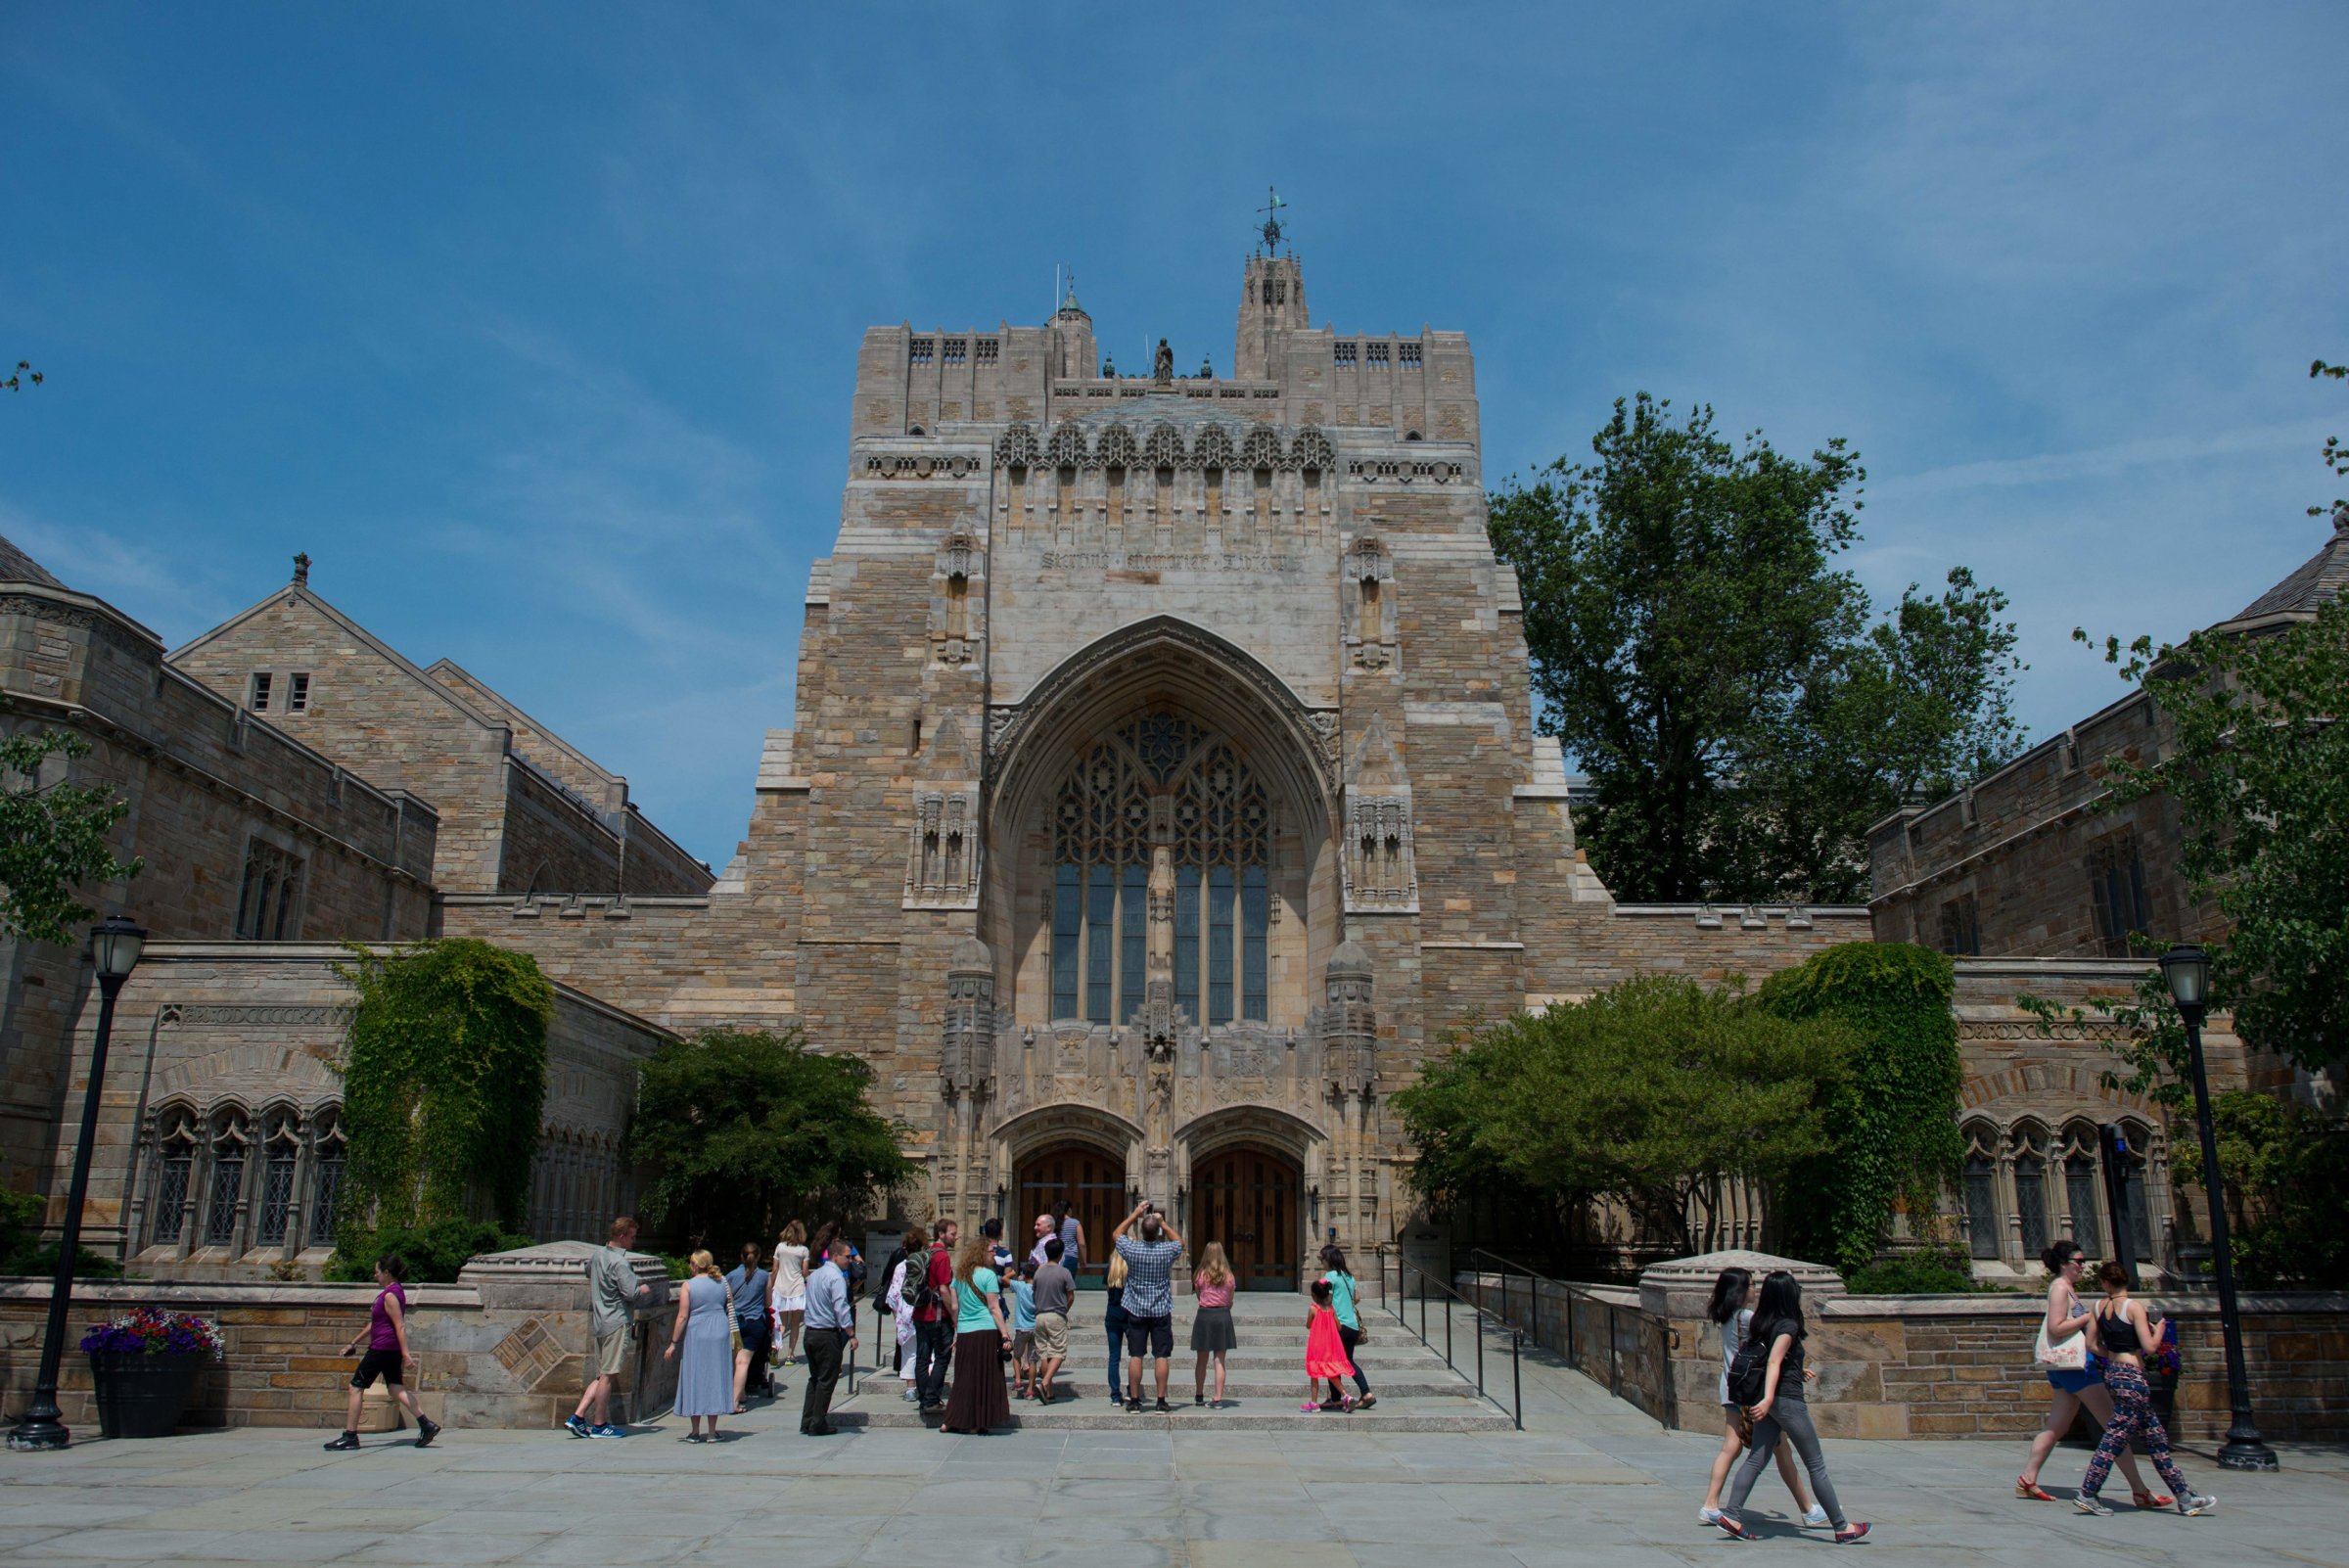 A tour group makes a stop at the Sterling Memorial Library on the Yale University campus in New Haven, Conn., on June 12, 2015.